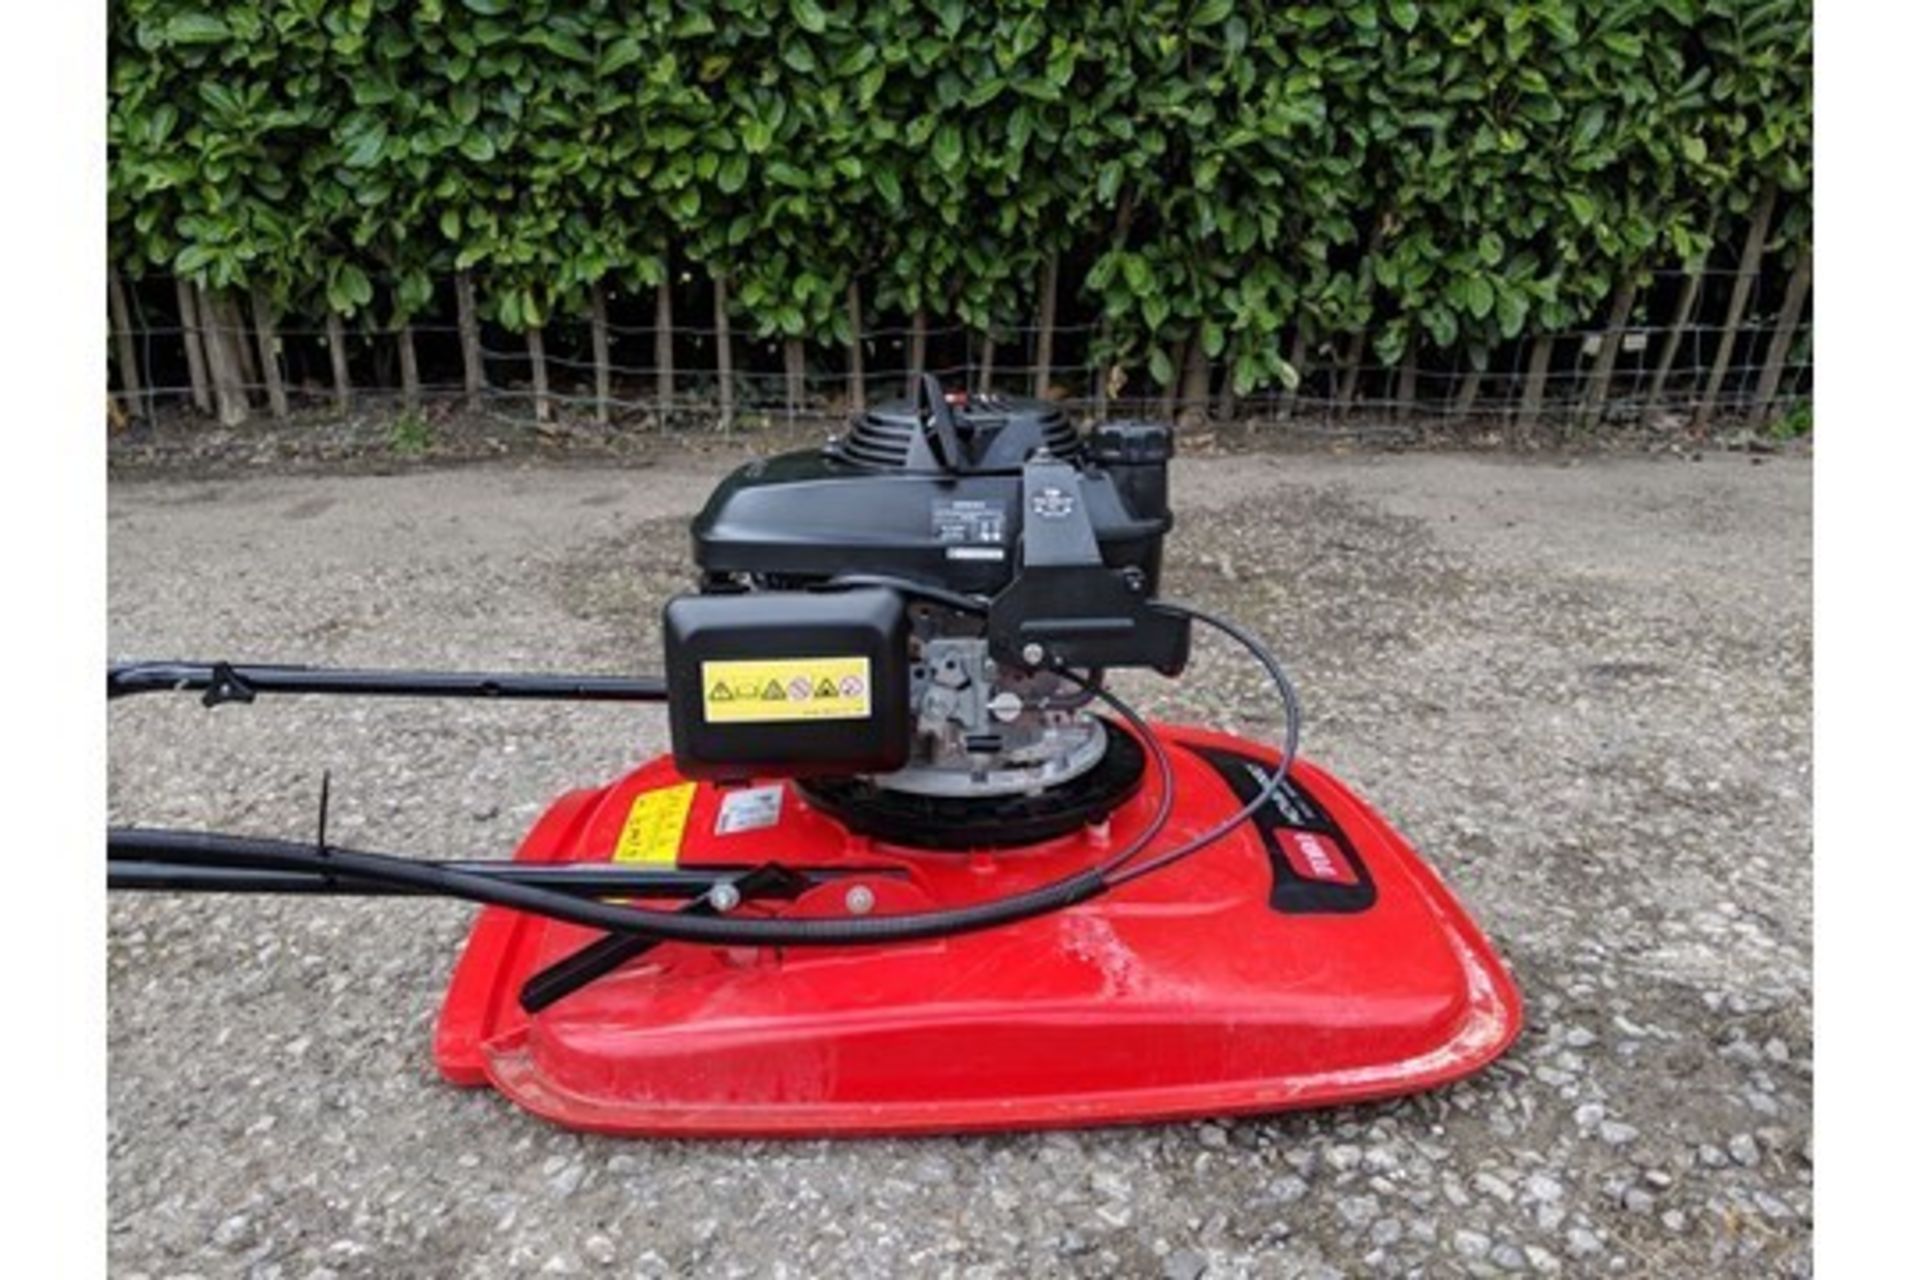 2011 Toro Hover Pro 500 Petrol Hover Mower - Image 2 of 5